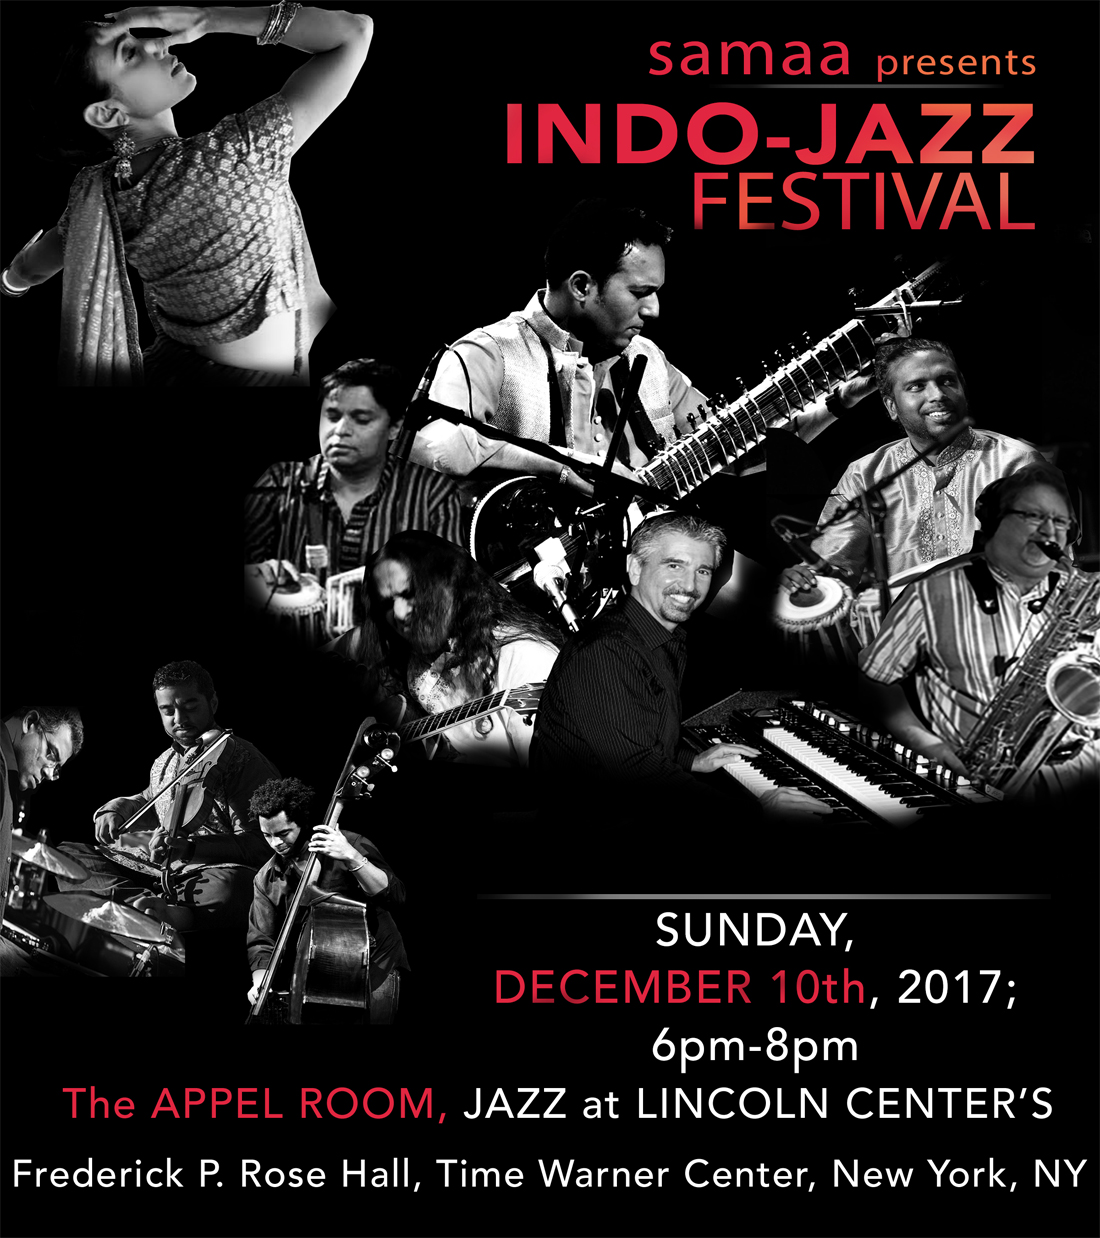 Appel Room, Jazz at Lincoln Center, NYC